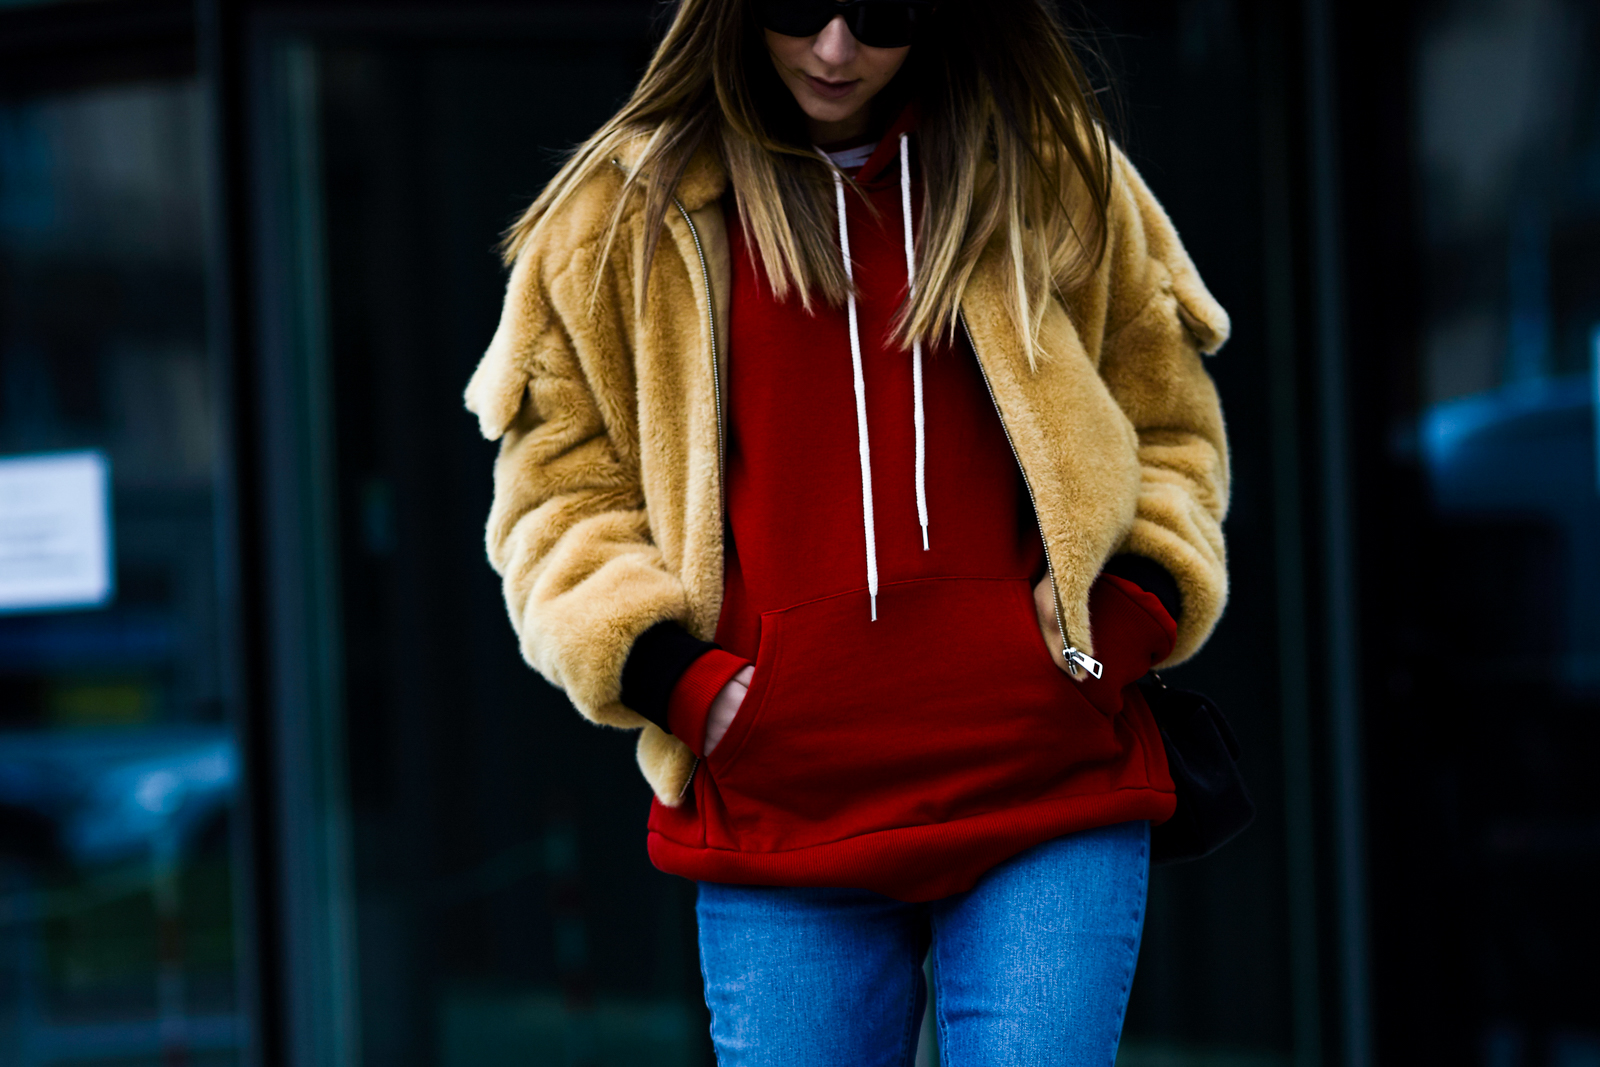 MFW Street Style: Italian blogger Chiara Capitani wearing a J.w.anderson Beige Teddy Flight Jacket and red hoodie after a fashion show in Milan, Italy